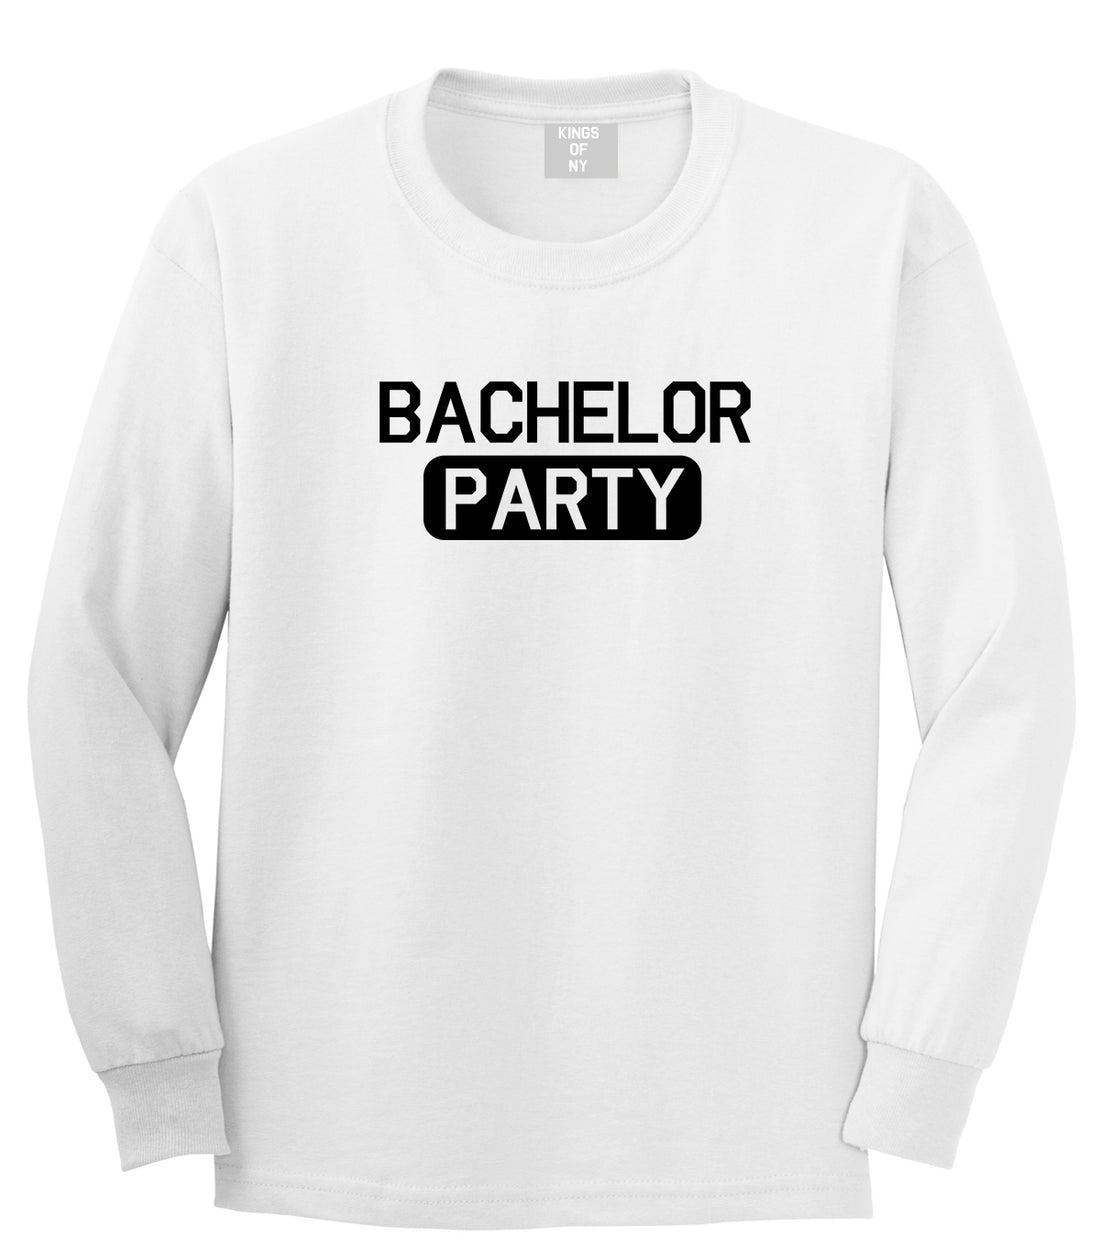 Bachelor Party White Long Sleeve T-Shirt by Kings Of NY